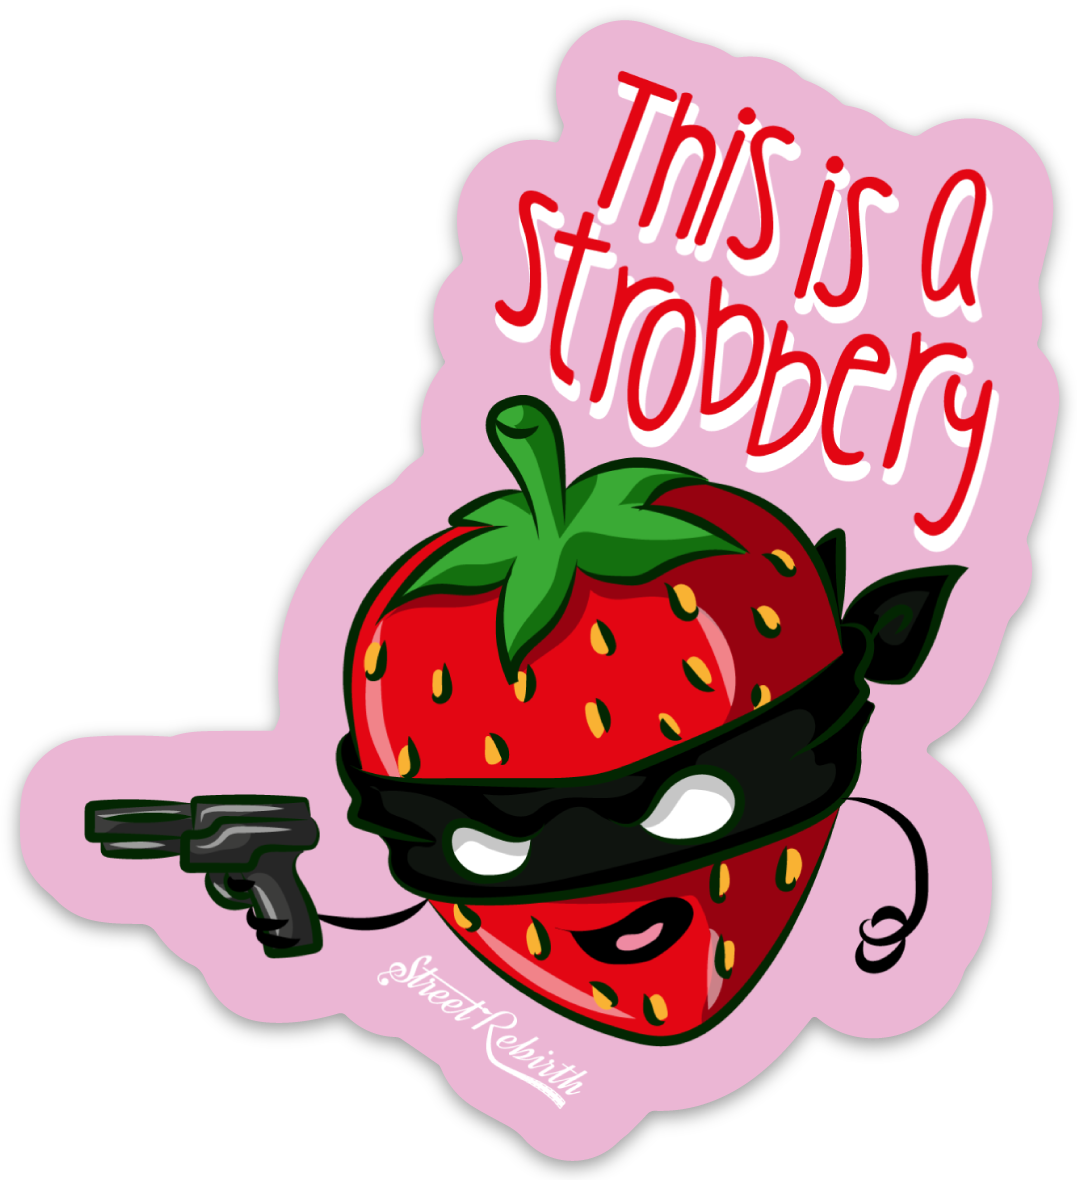 This Is a Strobbery PUN STICKER – ONE 4 INCH WATER PROOF VINYL STICKER – FOR HYDRO FLASK, SKATEBOARD, LAPTOP, PLANNER, CAR, COLLECTING, GIFTING